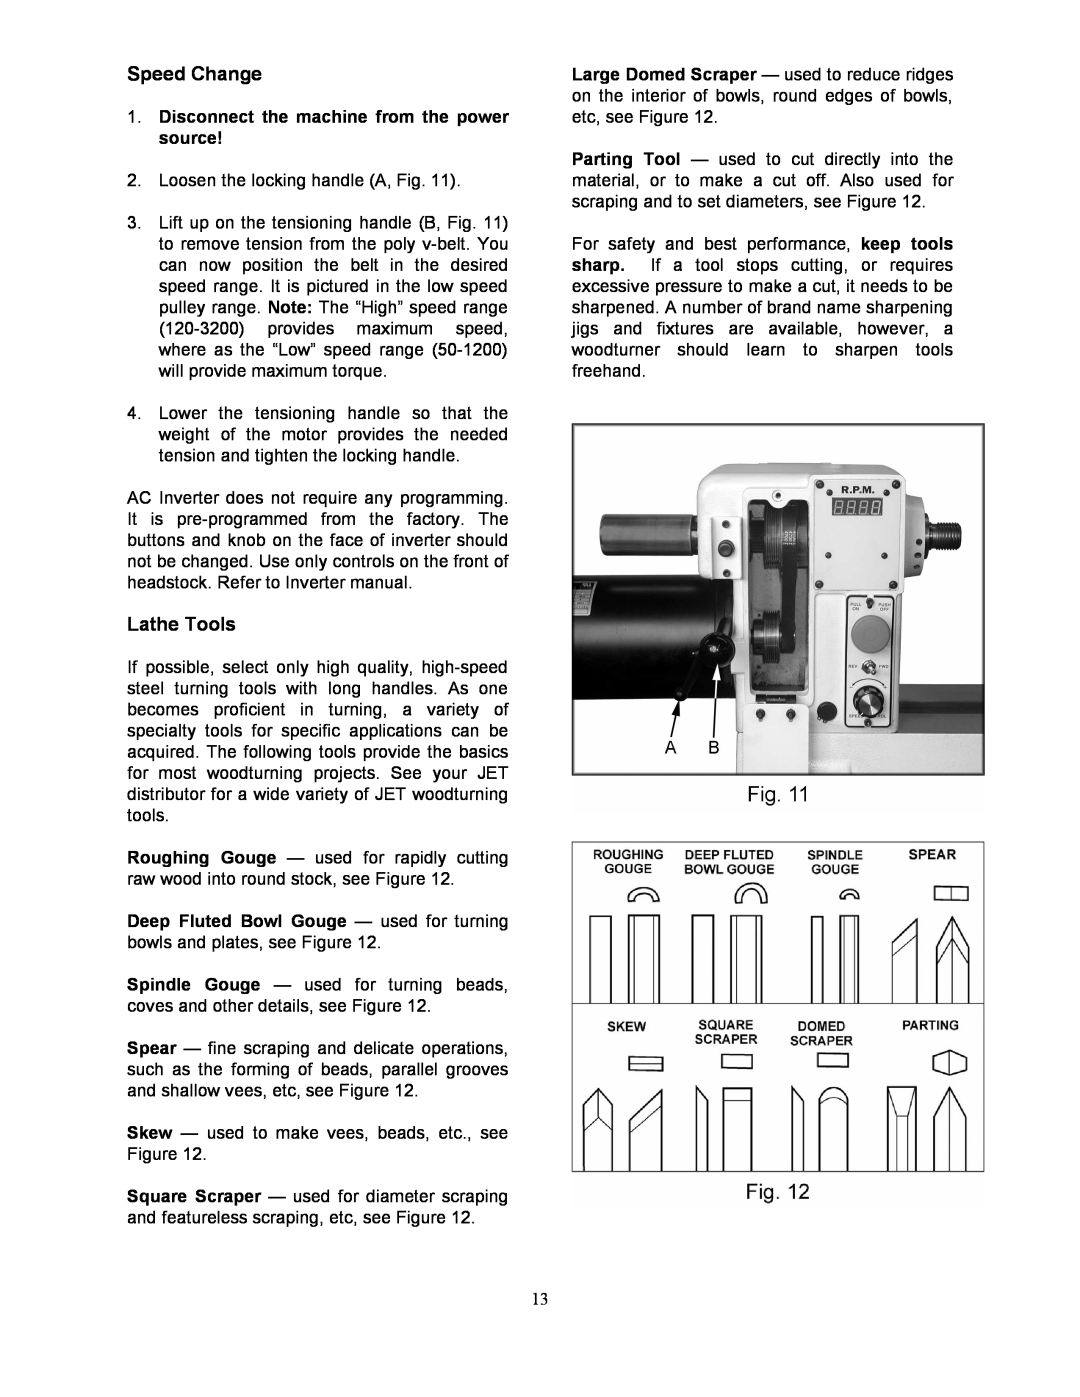 Jet Tools JWL-1642EVS-2 operating instructions Speed Change, Lathe Tools, Disconnect the machine from the power source 